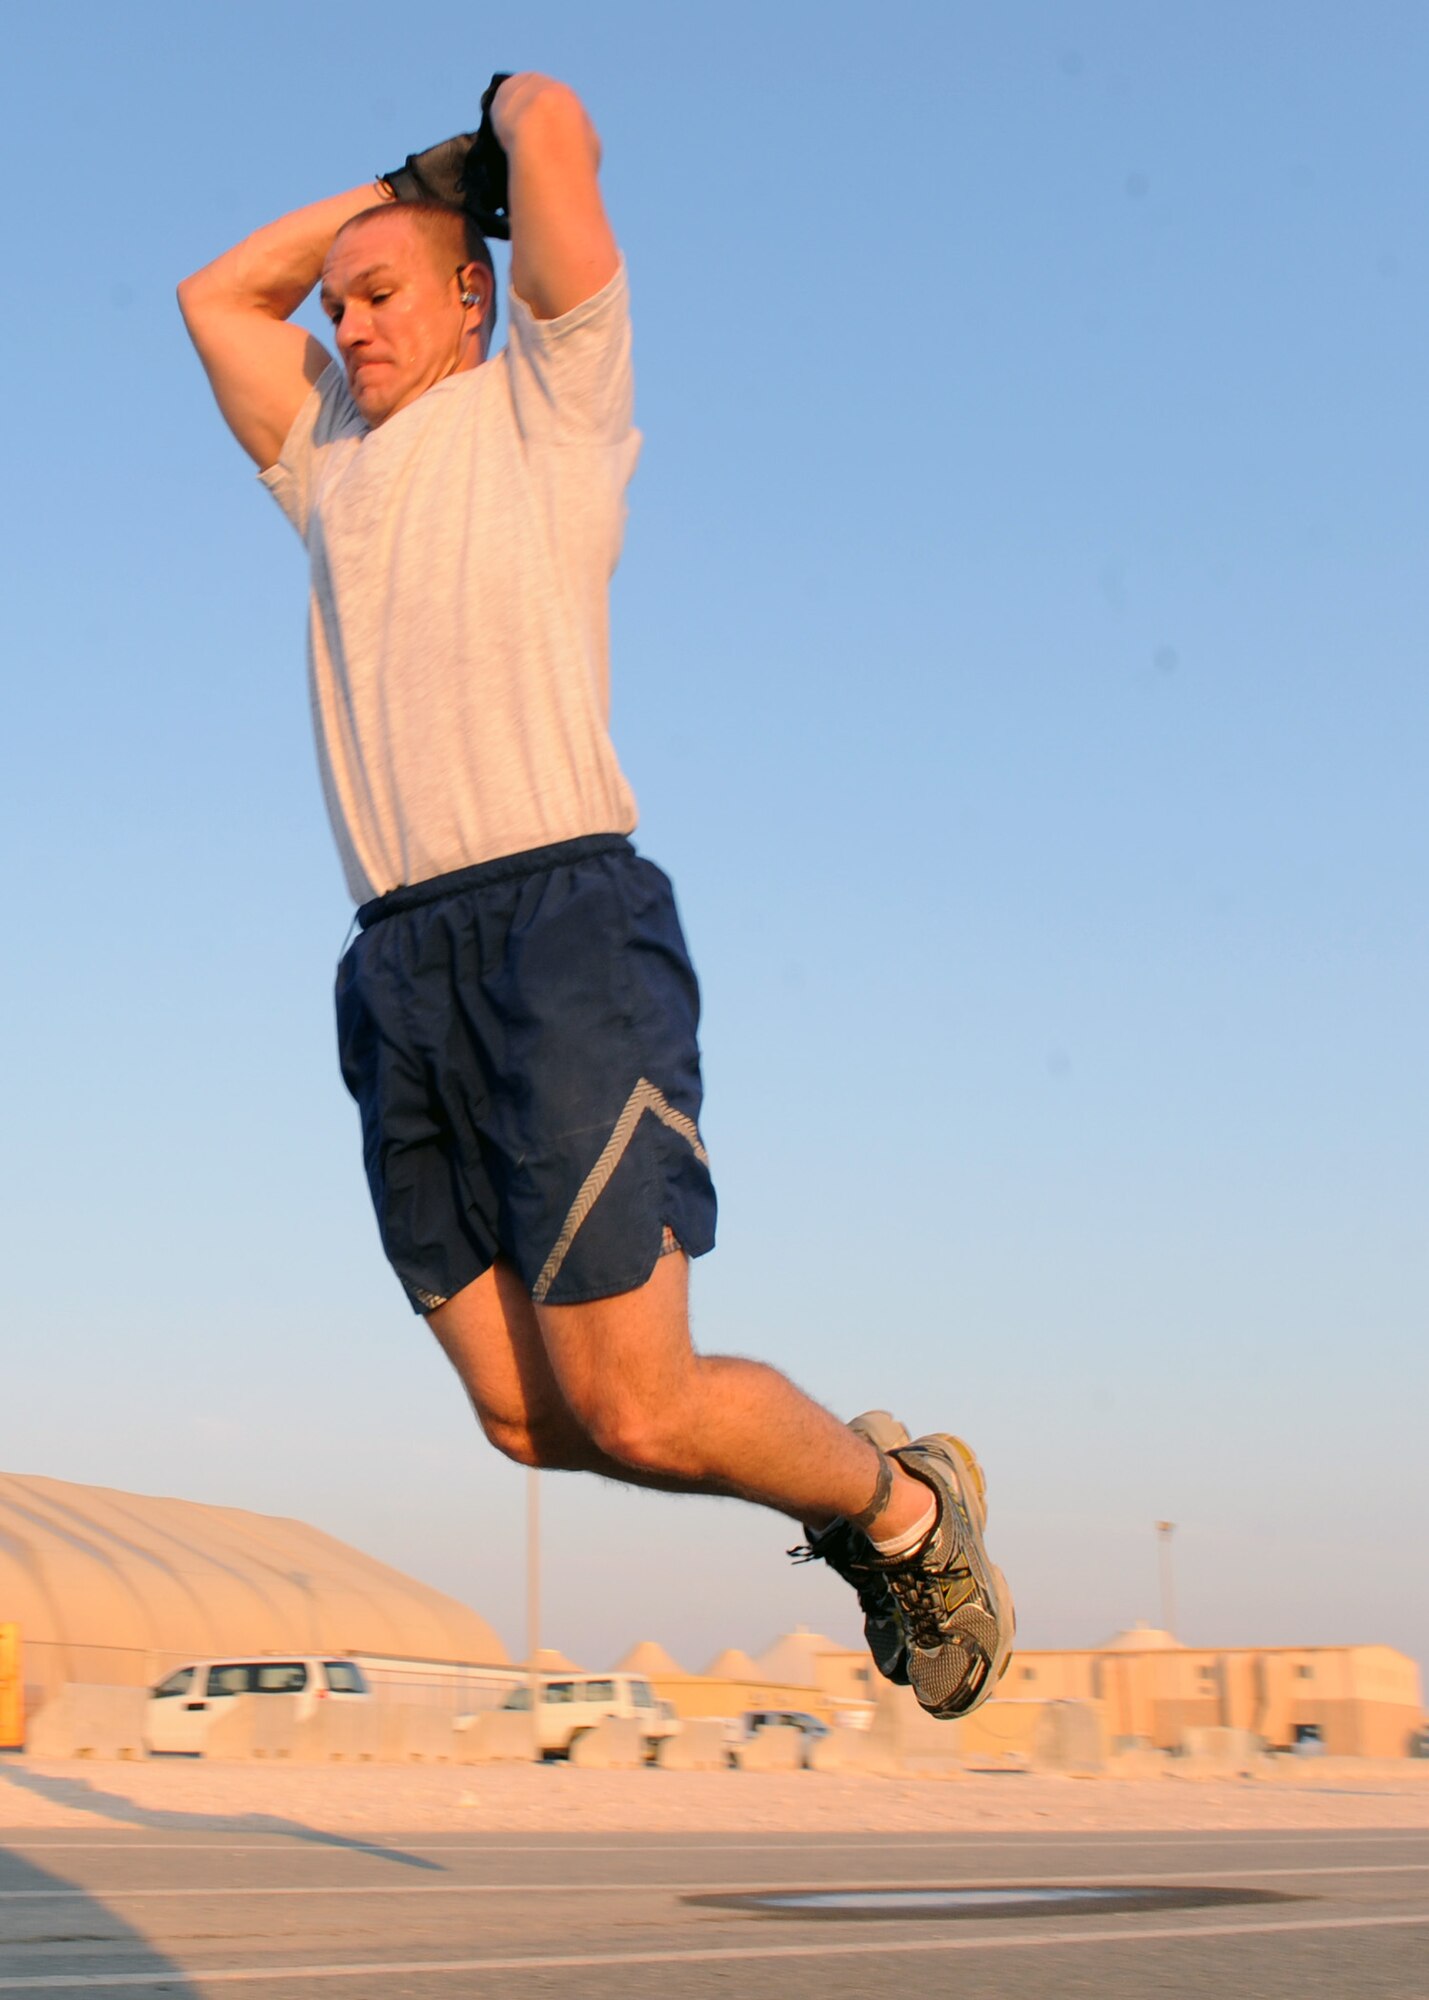 SOUTHWEST ASIA – Maj. Brad Boudreaux, 609th Air Communications Squadron Detachment 1 director of operations, takes flight during the extreme burpee challenge Dec. 1. To break the monotony of a deployment, the squadron has come up with extreme fitness challenges for their Airmen to participate in. Bodreaux finished all four laps in 2 hours, 9 minutes and 44 seconds. (Not pictured) Staff Sgt. Aaron Morrill, 609th ACOMS Det. 1, placed second with a time of 1 hour, 40 minutes and 42 seconds. (U.S. Air Force photo/Senior Airman Joel Mease)